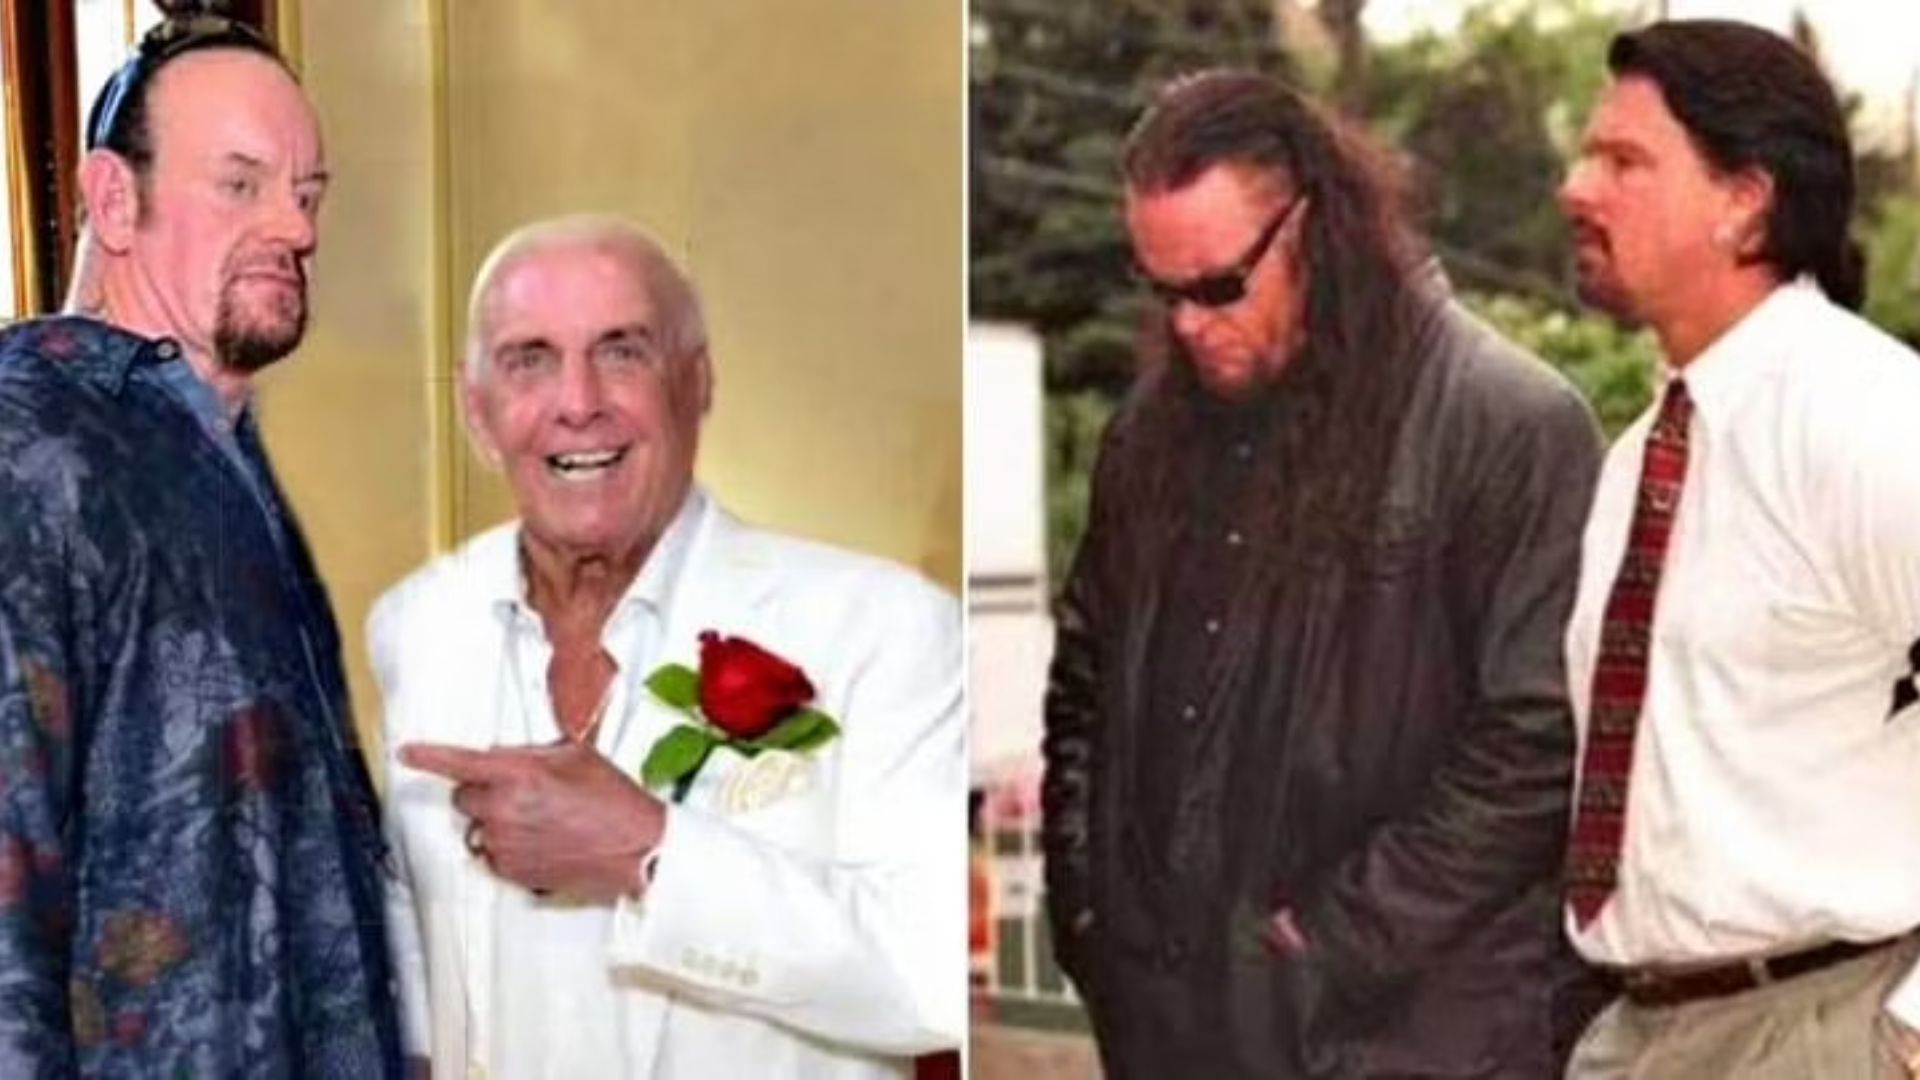 The Deadman shares a very special relationship with these Superstars